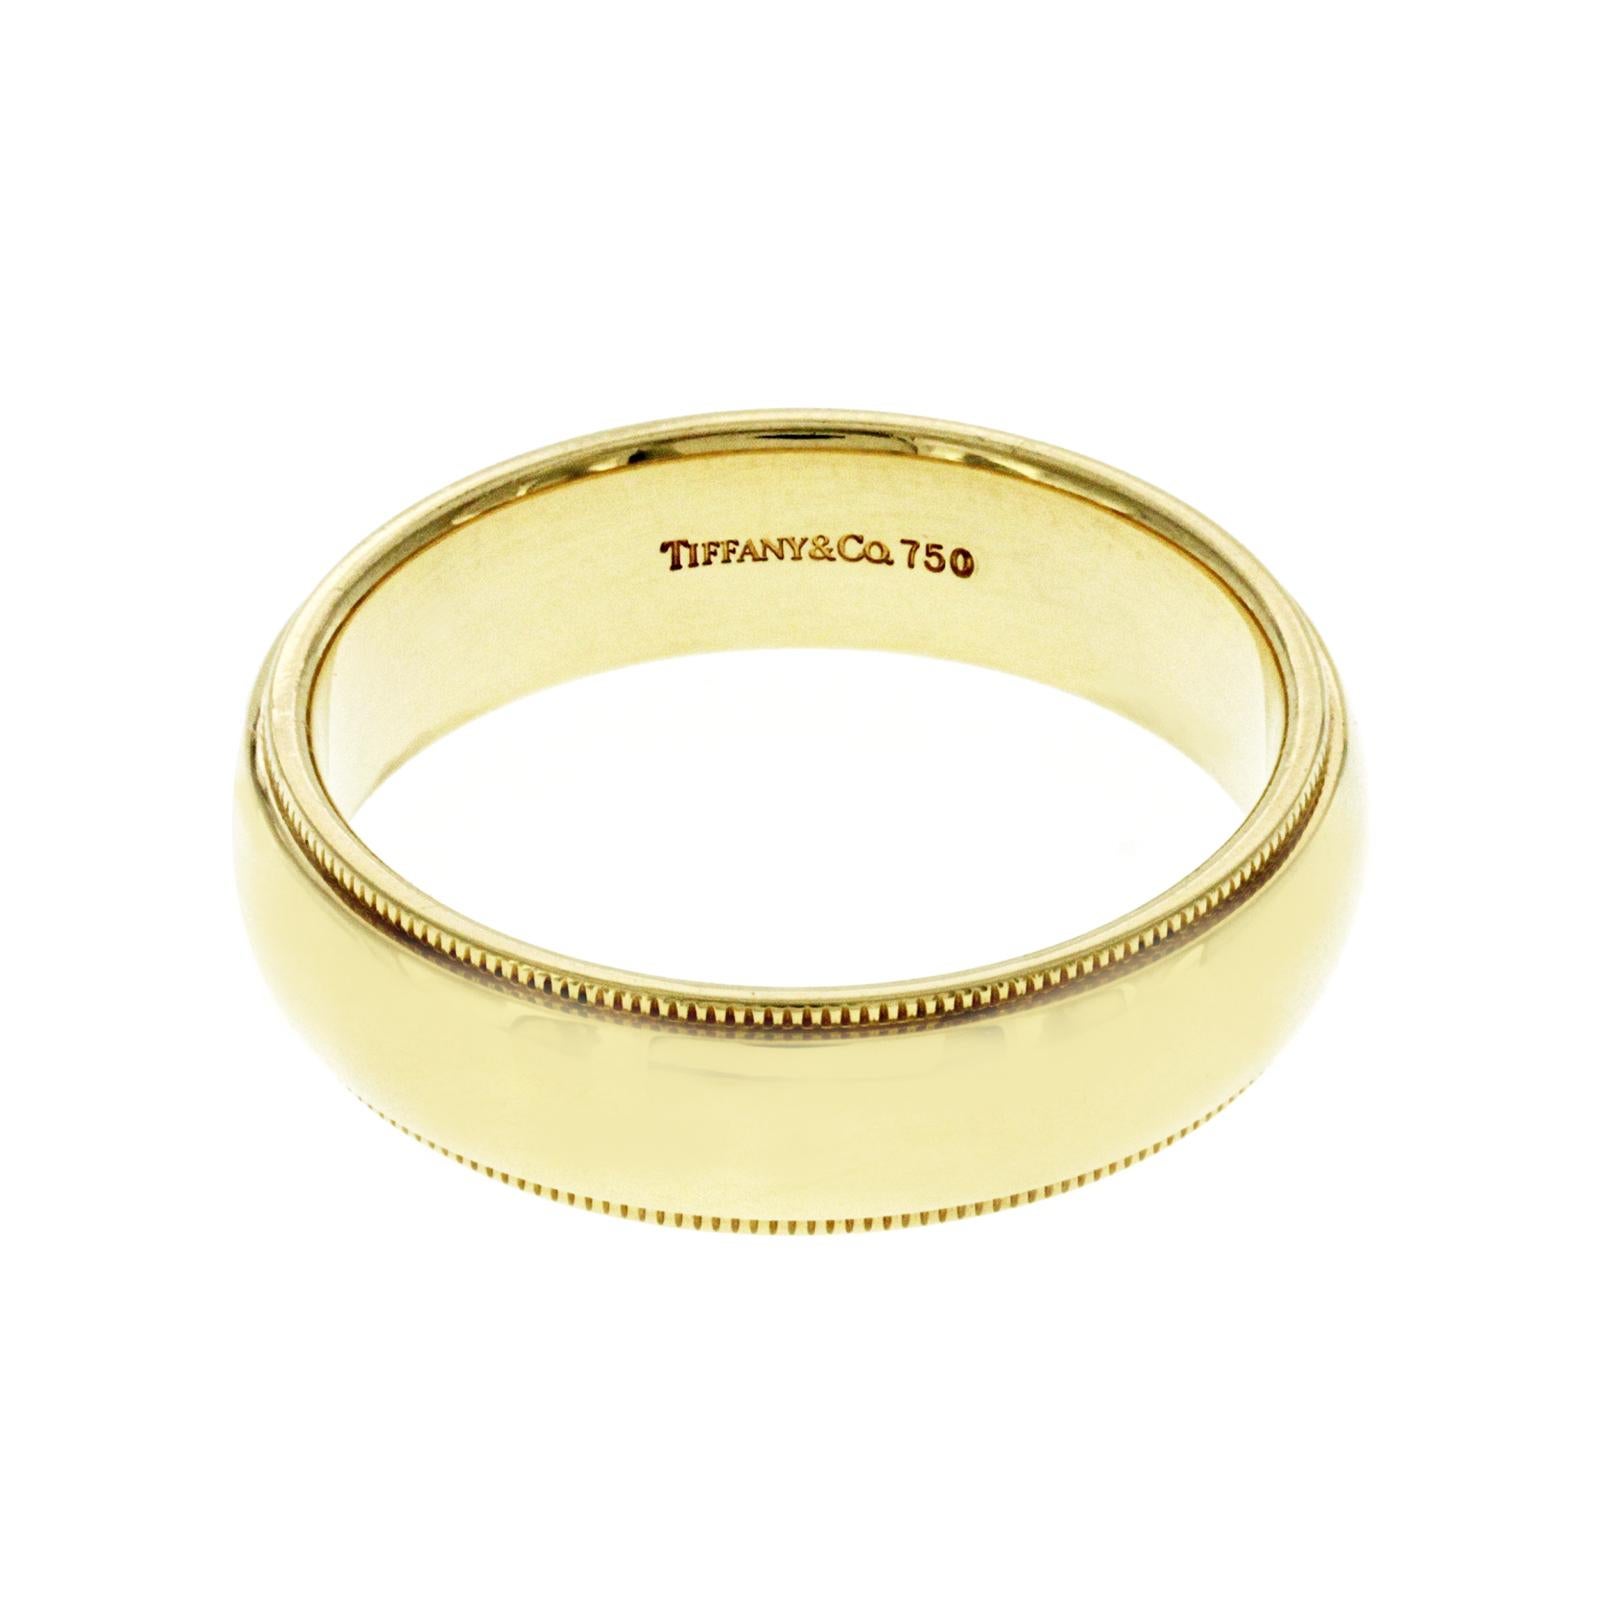 100% Authentic, 100% Customer Satisfaction

Top: 6 mm

Band Width: 6 mm

Metal: 18K Yellow Gold

Size: 10.5

Hallmarks: TIFFANY & CO 750

Total Weight: 11 Grams

Stone: None

Condition: PreOwned

Estimated Retail Price: $2300

Stock Number: U518